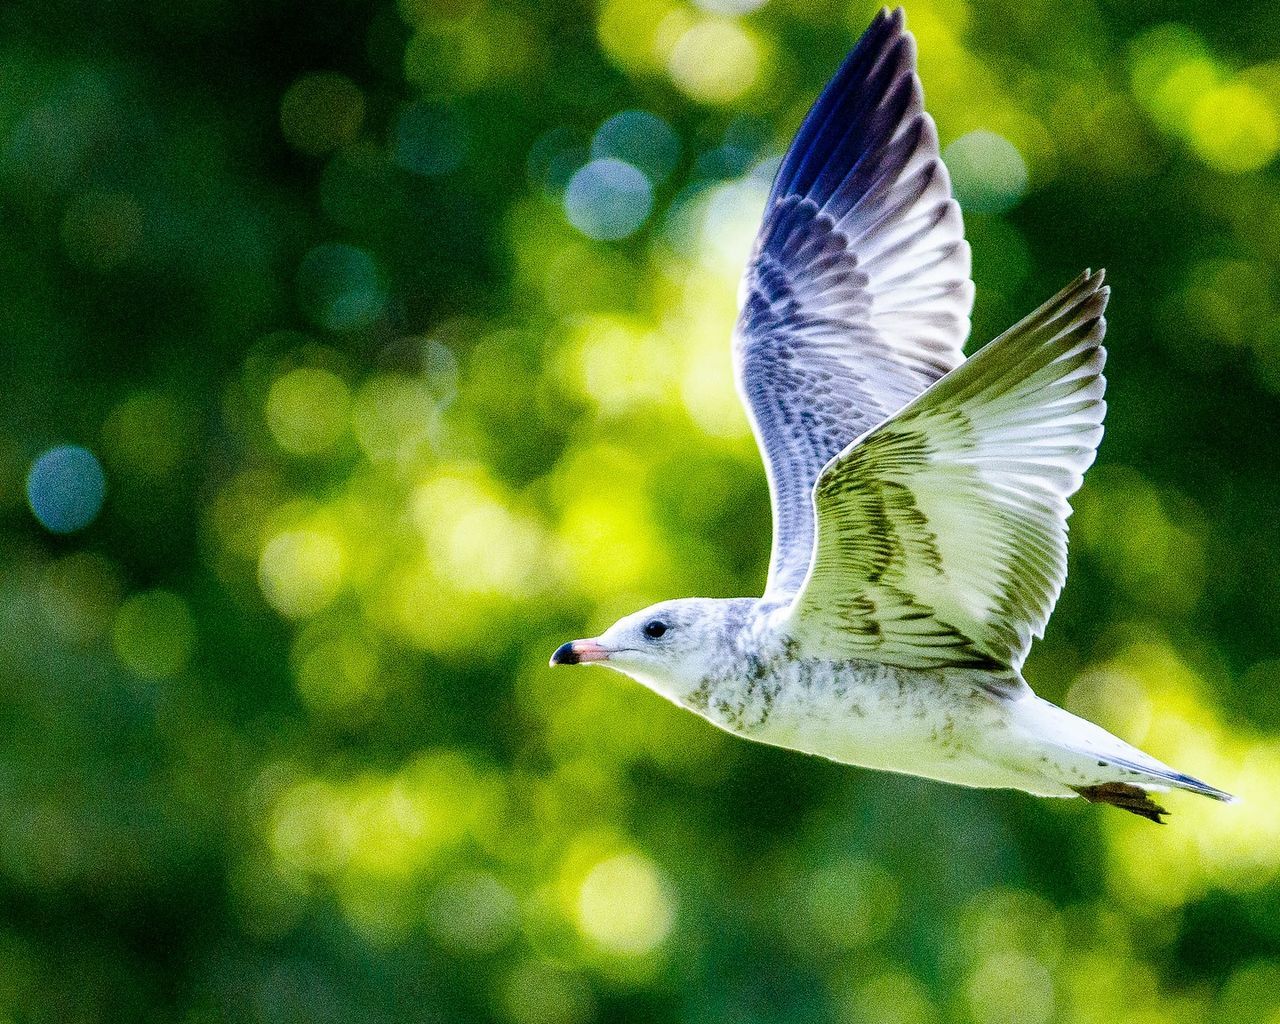 Close-up side view of a bird in flight